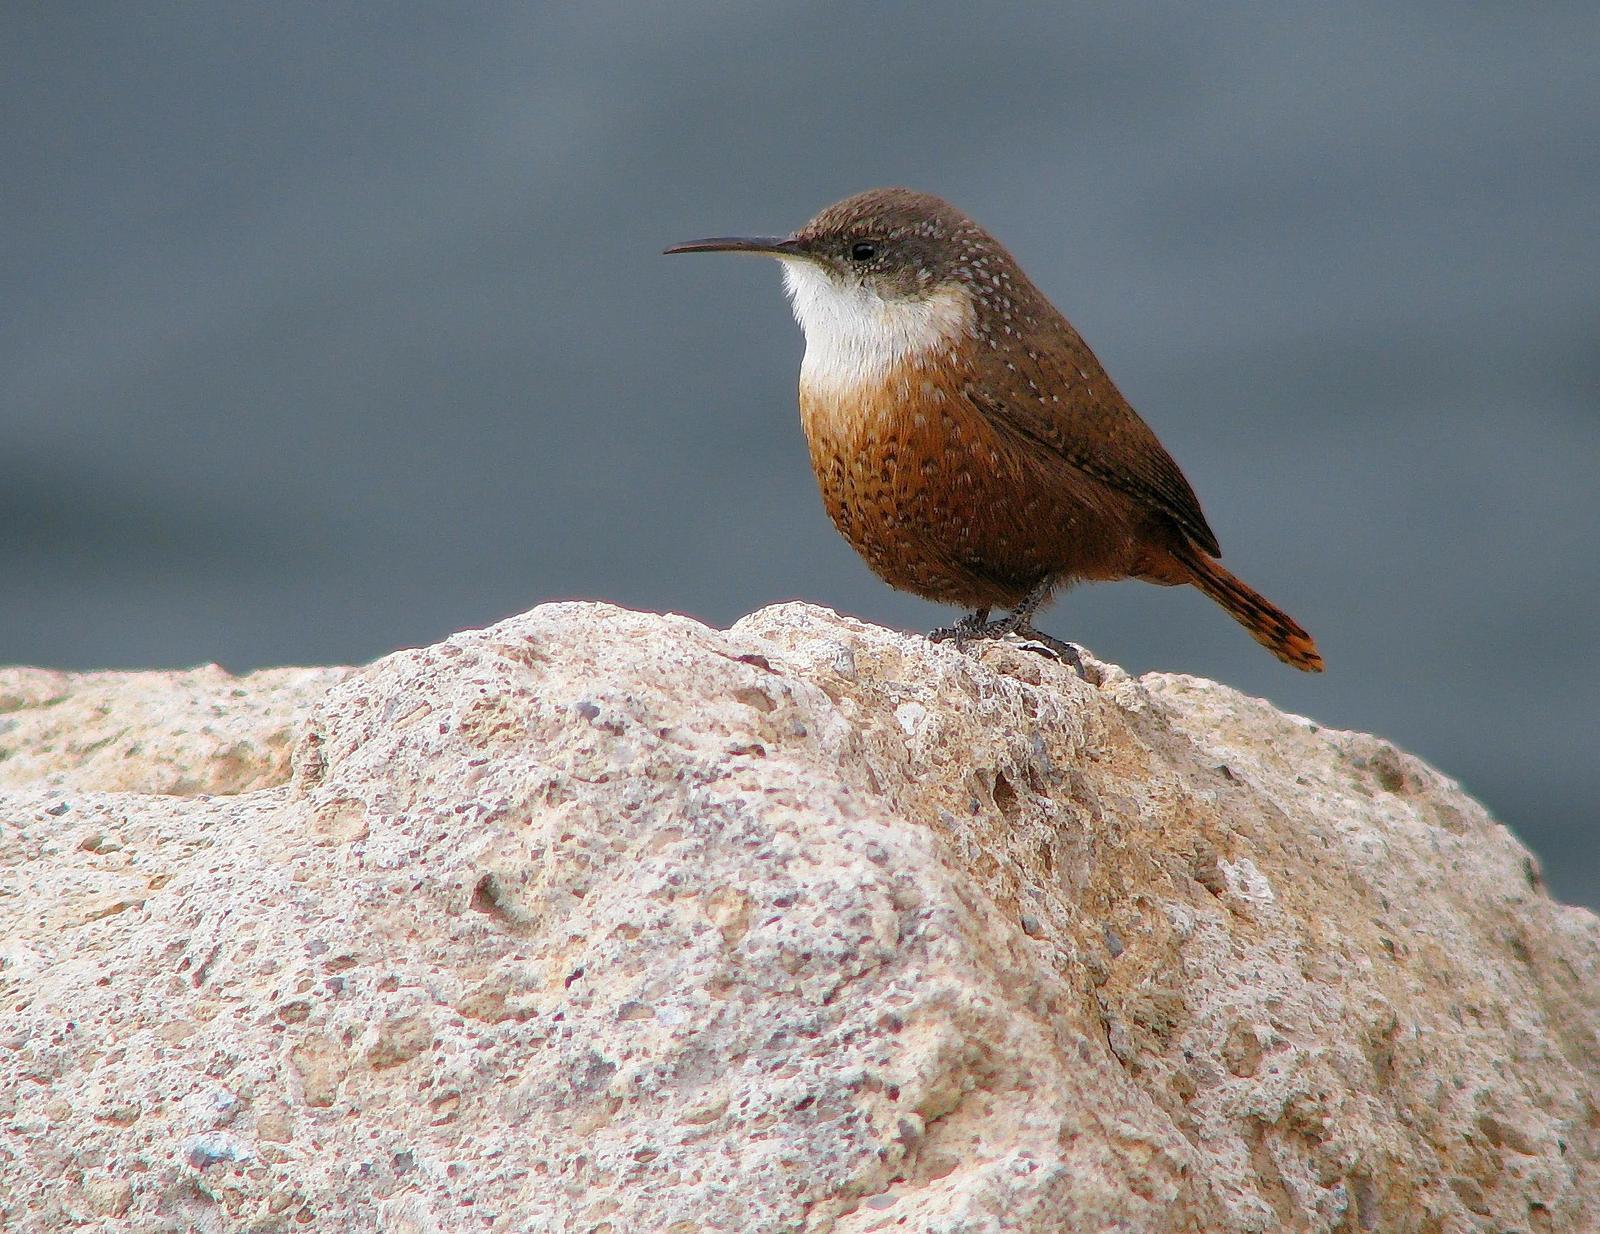 Canyon Wren Photo by Michael Moore